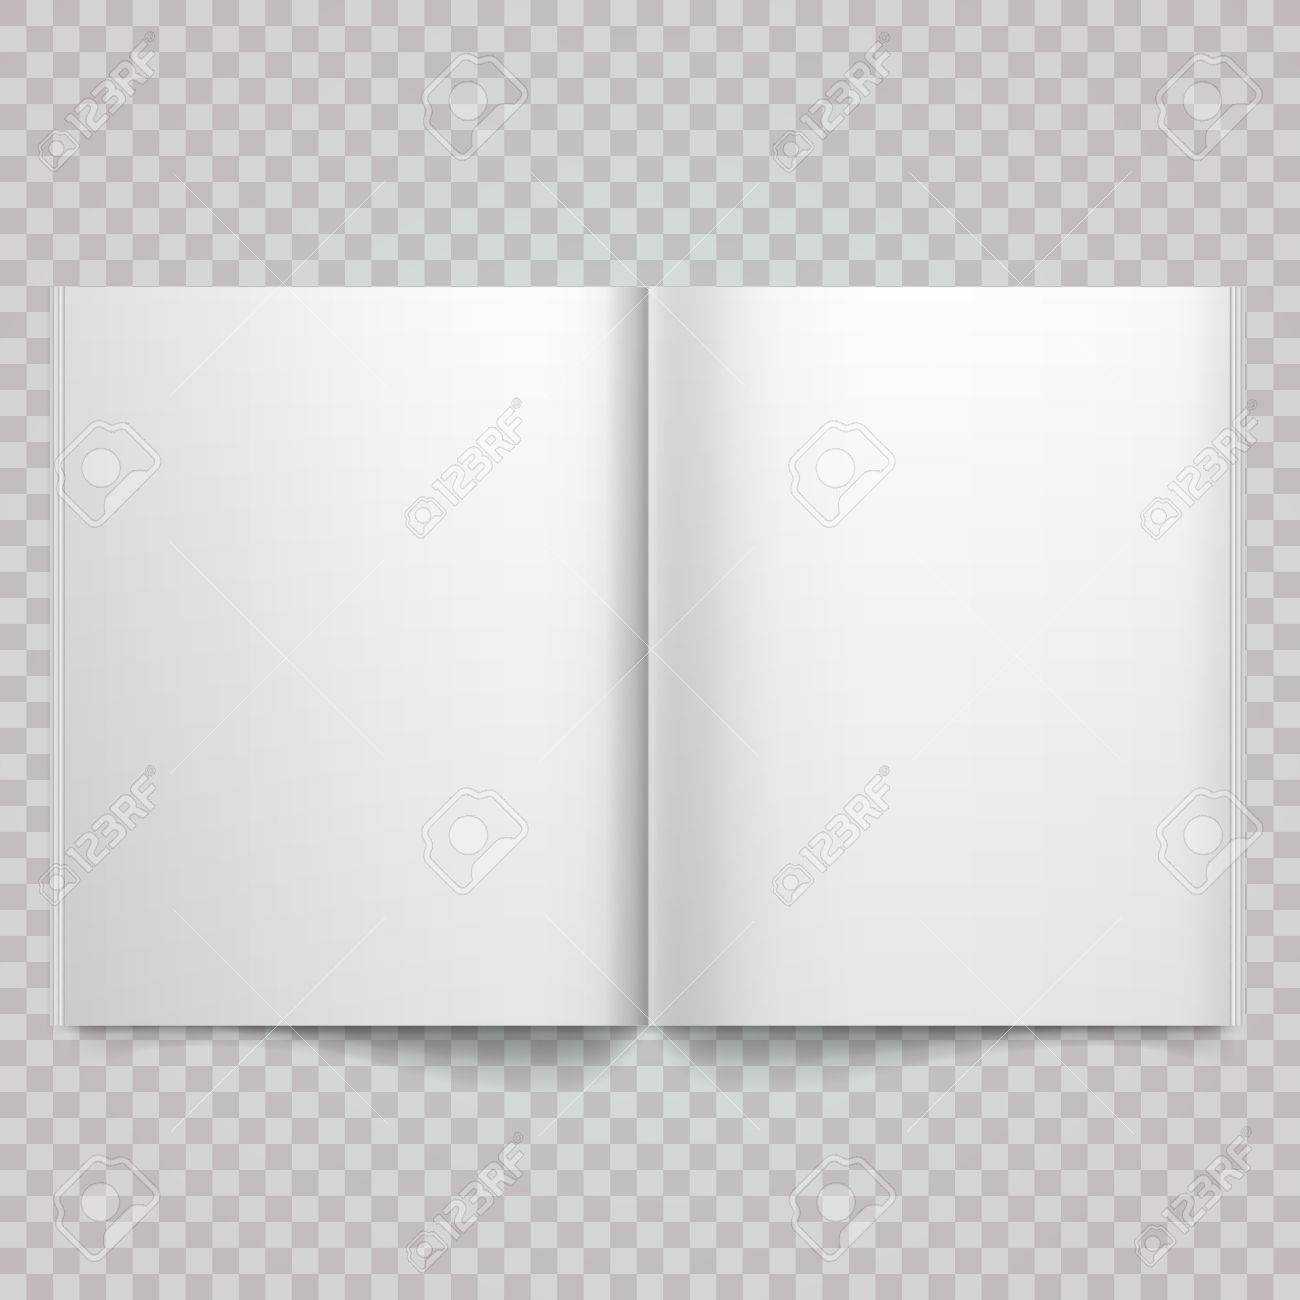 Open Magazine Double Page Spread With Blank Pages. Isolated White.. Regarding Blank Magazine Spread Template